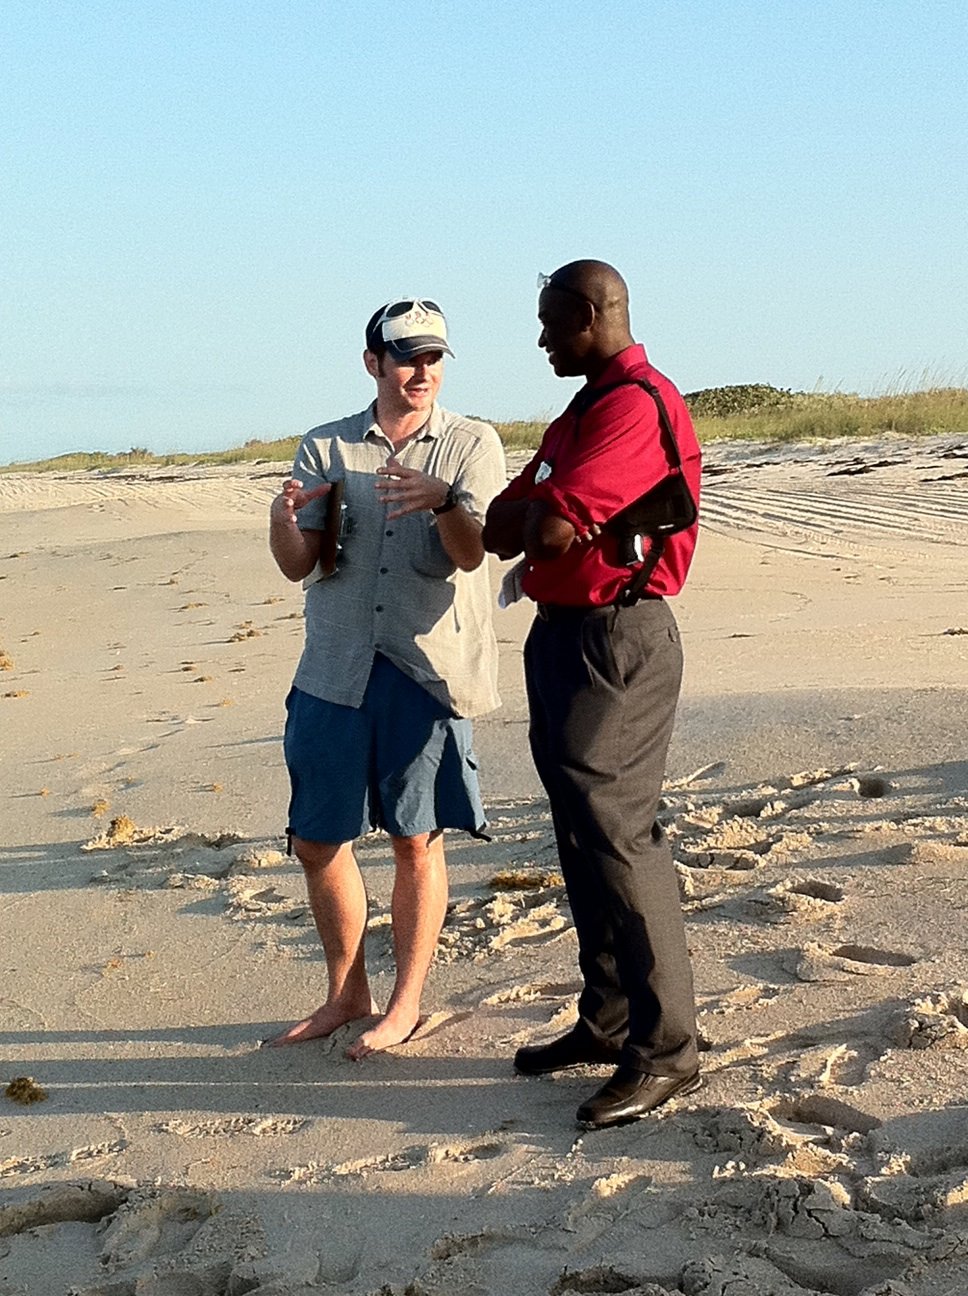 Our director John Goshorn giving a little insight before our first take at Melbourne Beach FL.